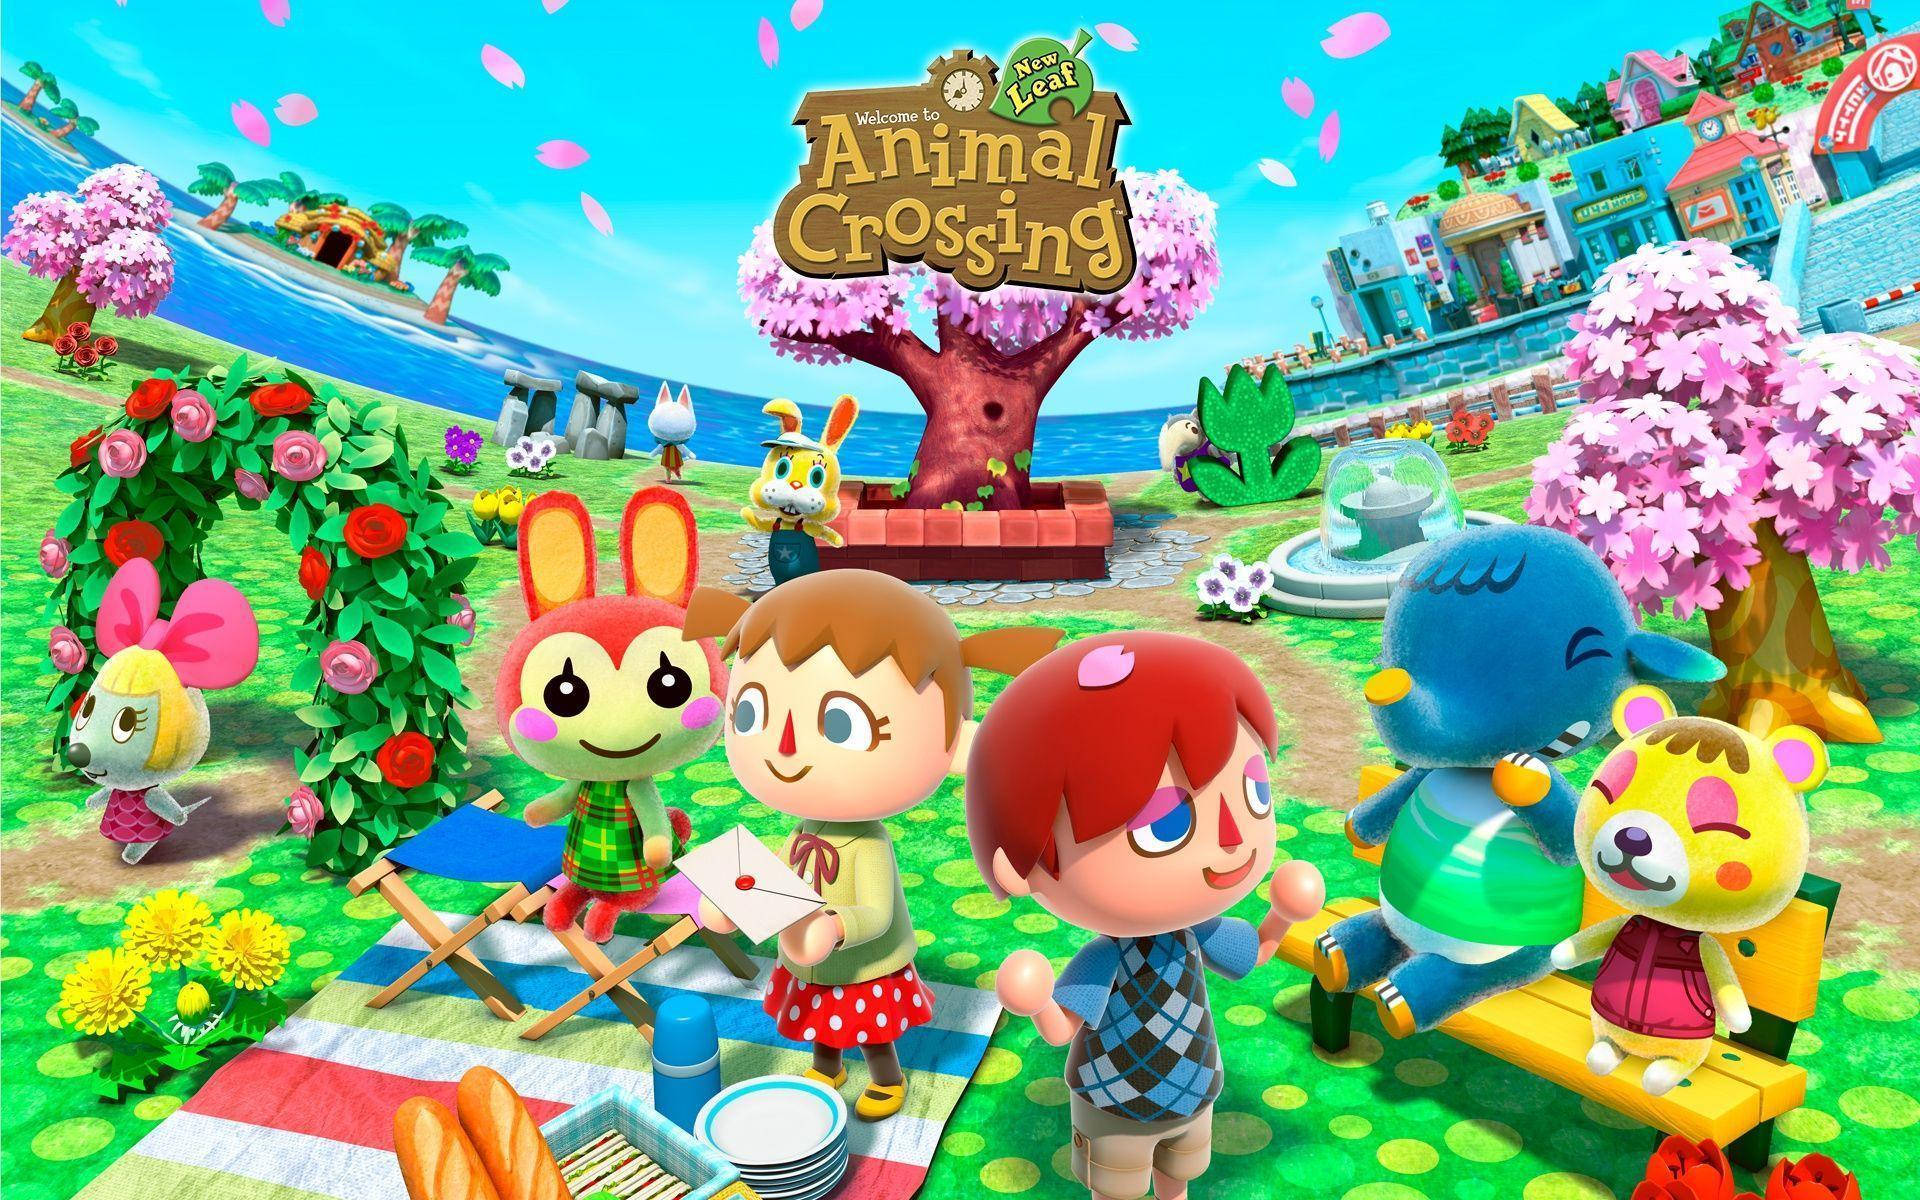 Animal Crossing: New Horizons, the most highly anticipated Nintendo game of the year. Wallpaper